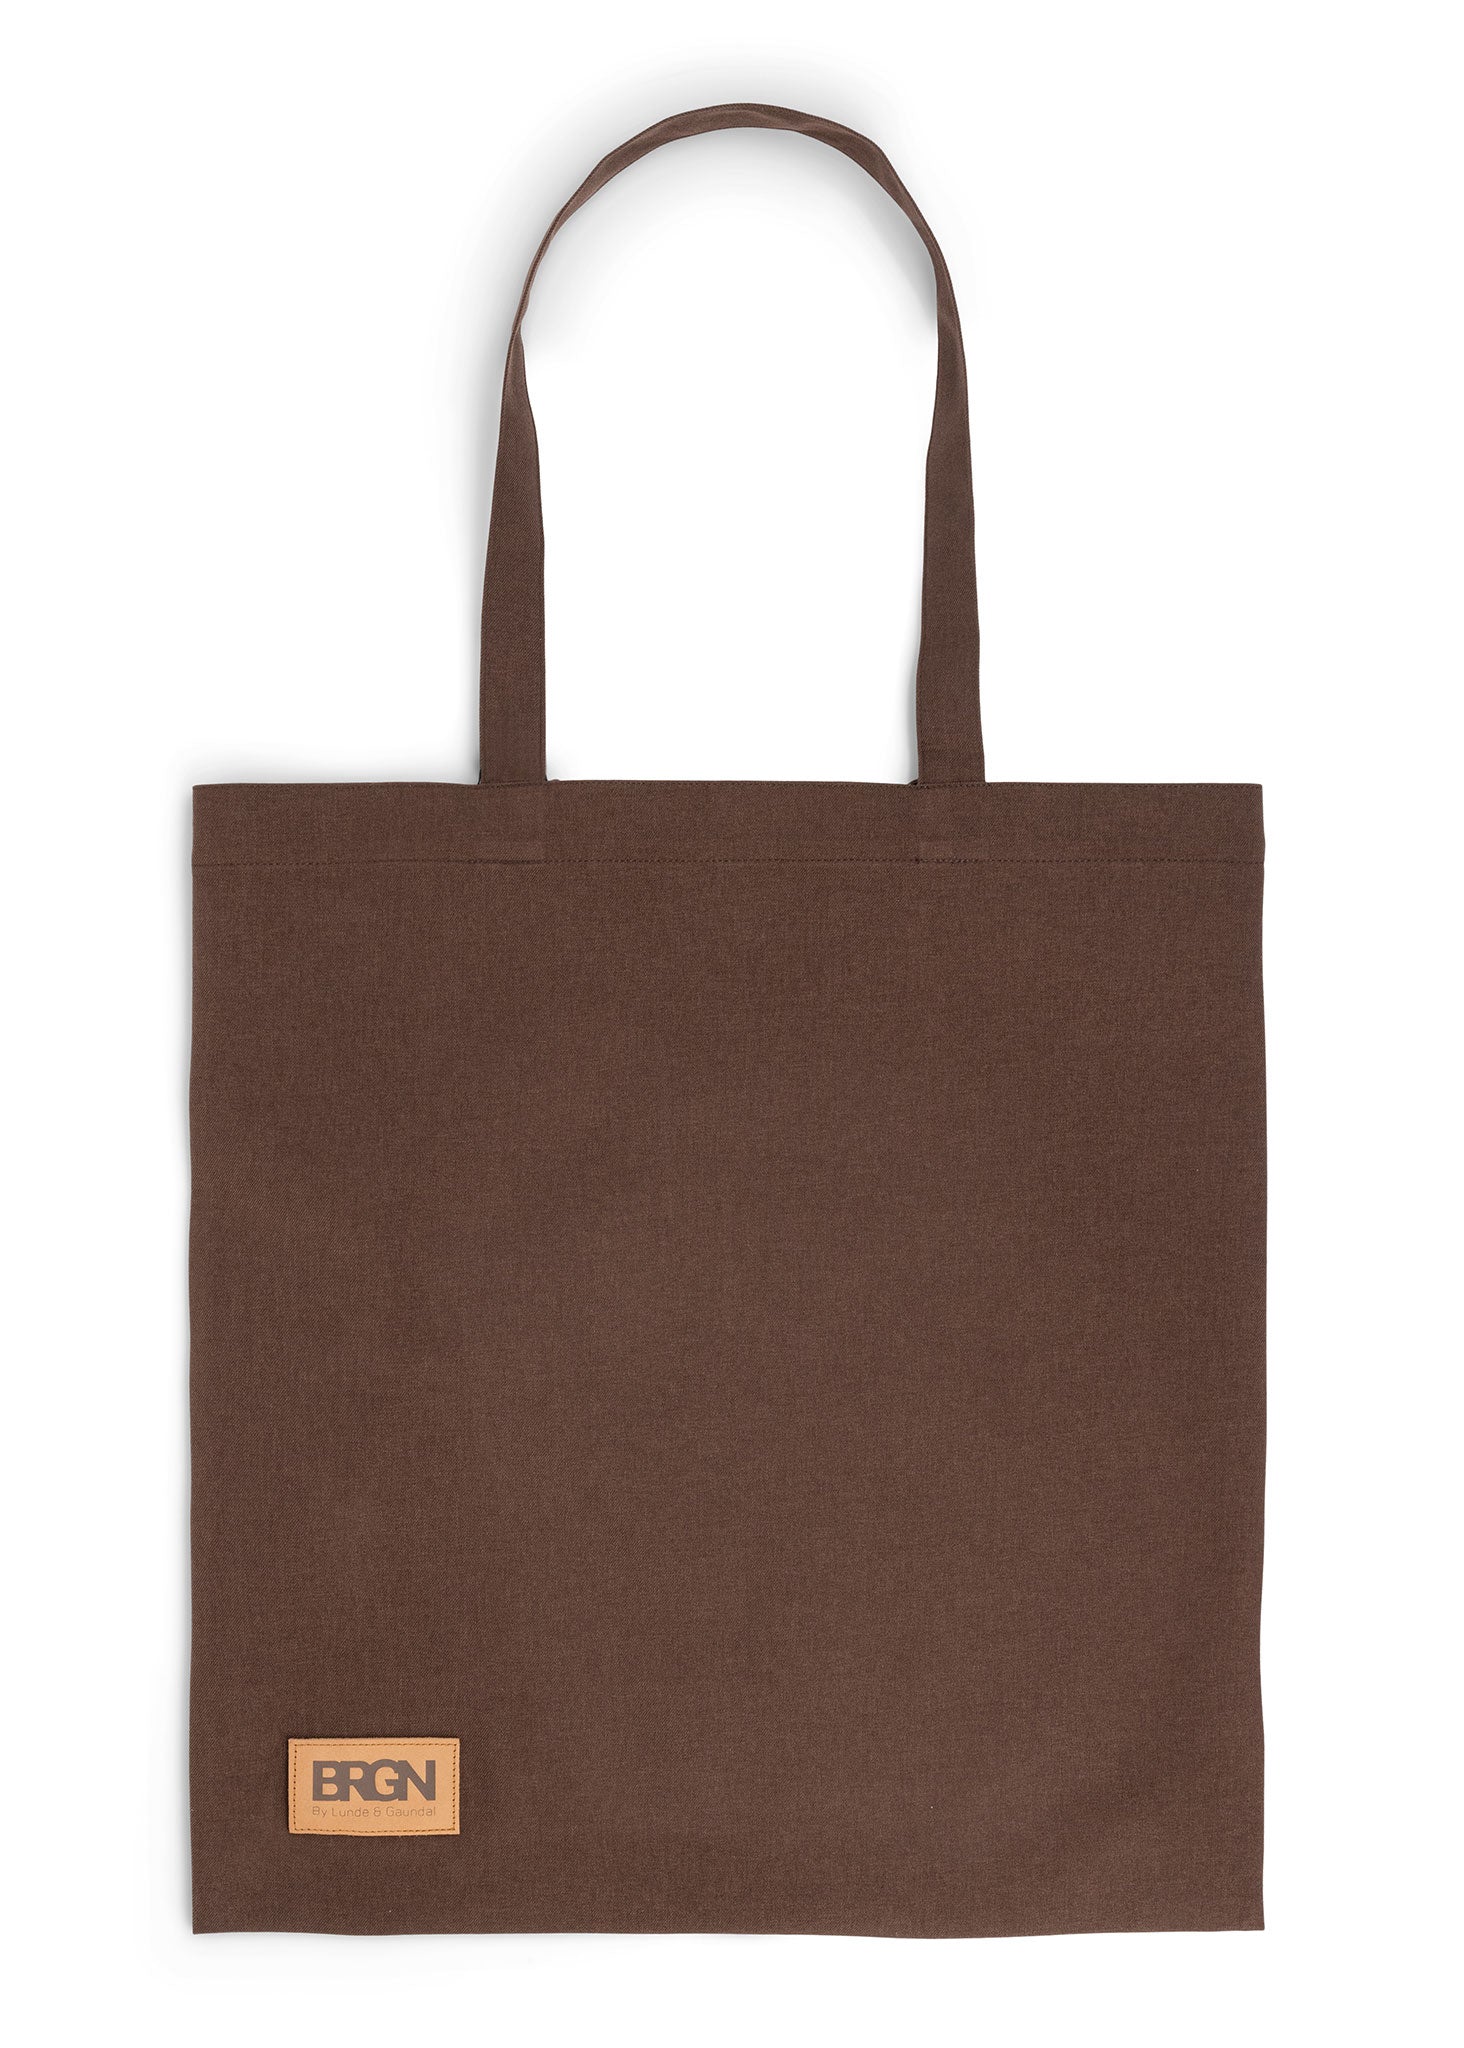 BRGN Tote Bag Marketing Material 187 Chocolate Brown